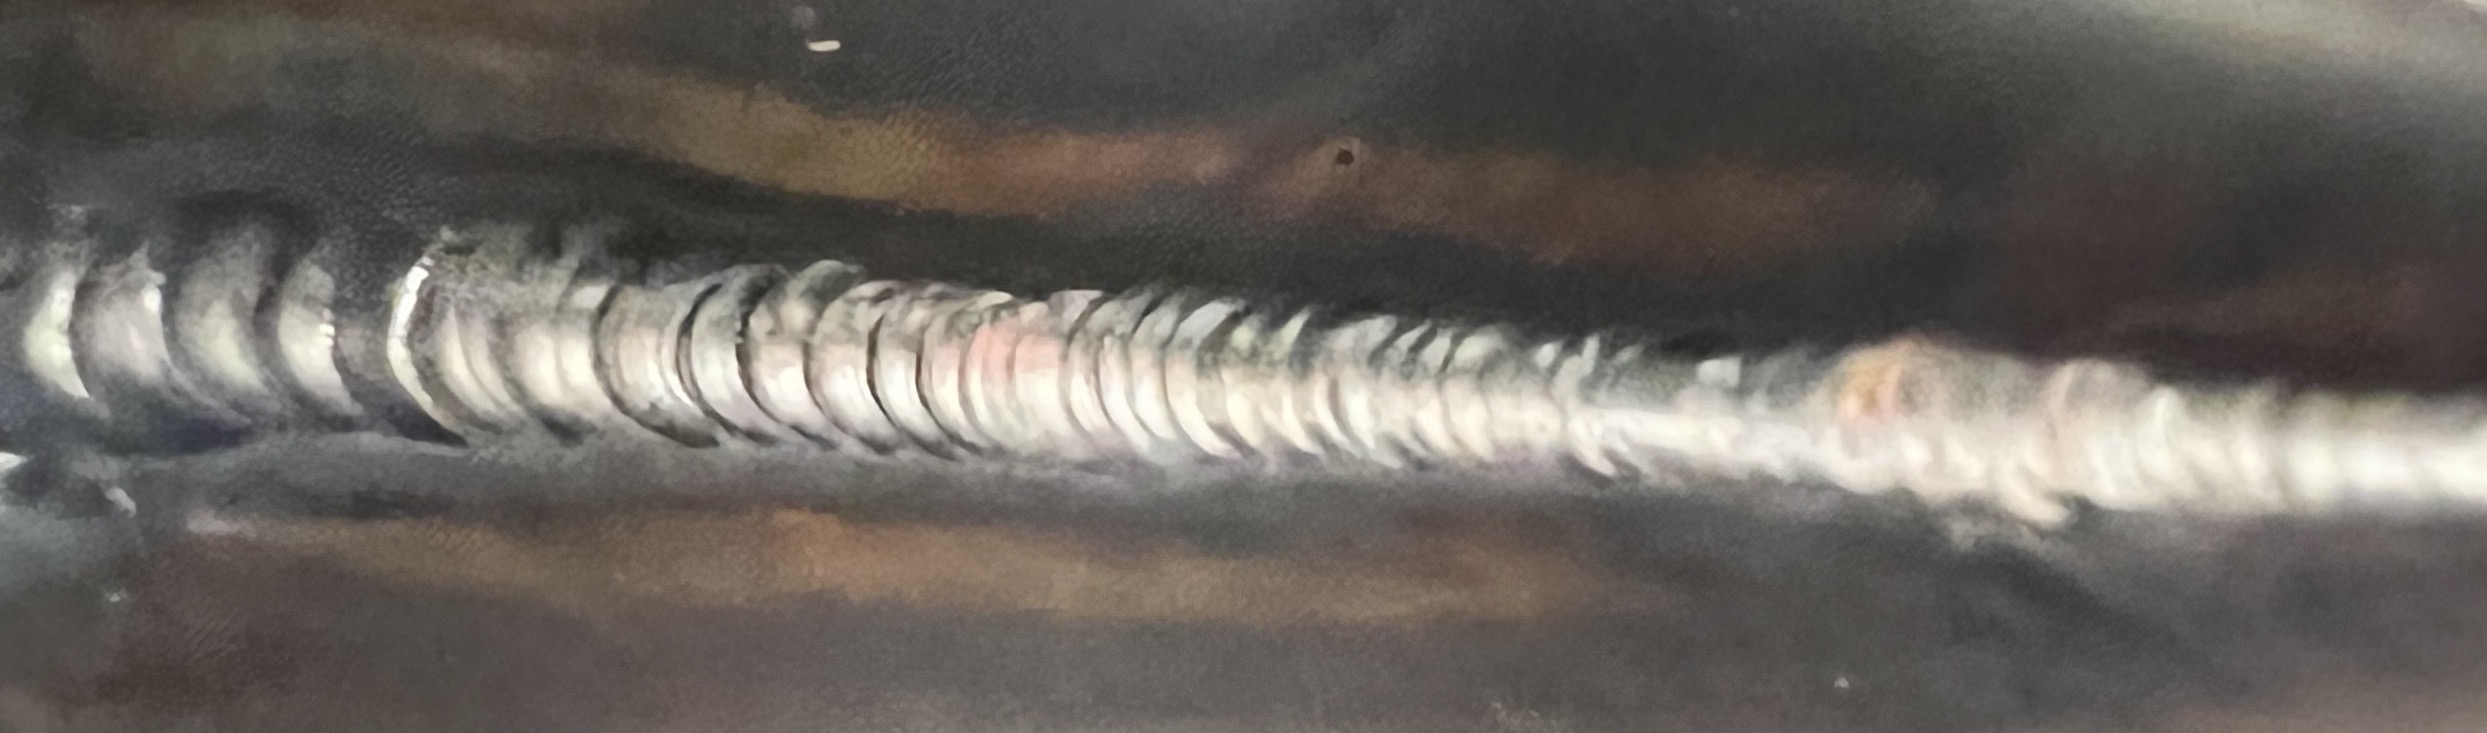 image of a TIG weld on steel that looks like stacked dimes